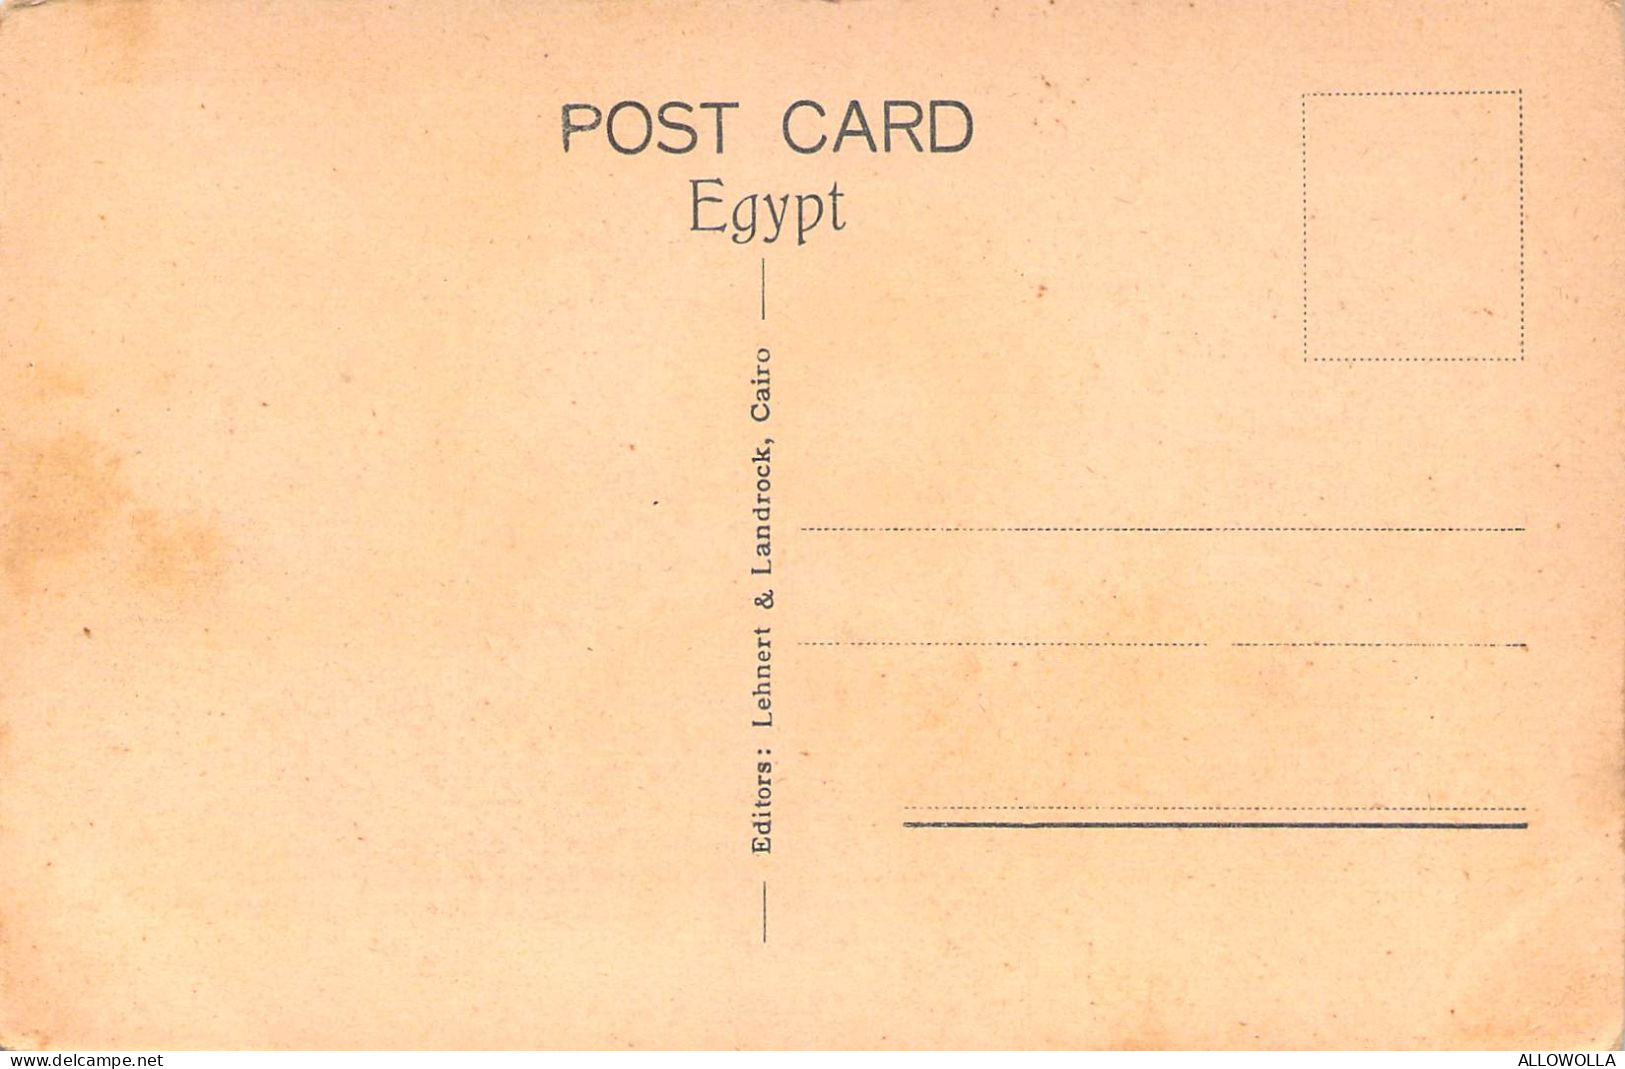 27048 " LUXOR-THE LUXOR TEMPLE SEEN FROM THE NILE " ANIMATED-VERA FOTO-CART. POST.NON SPED. - Israël